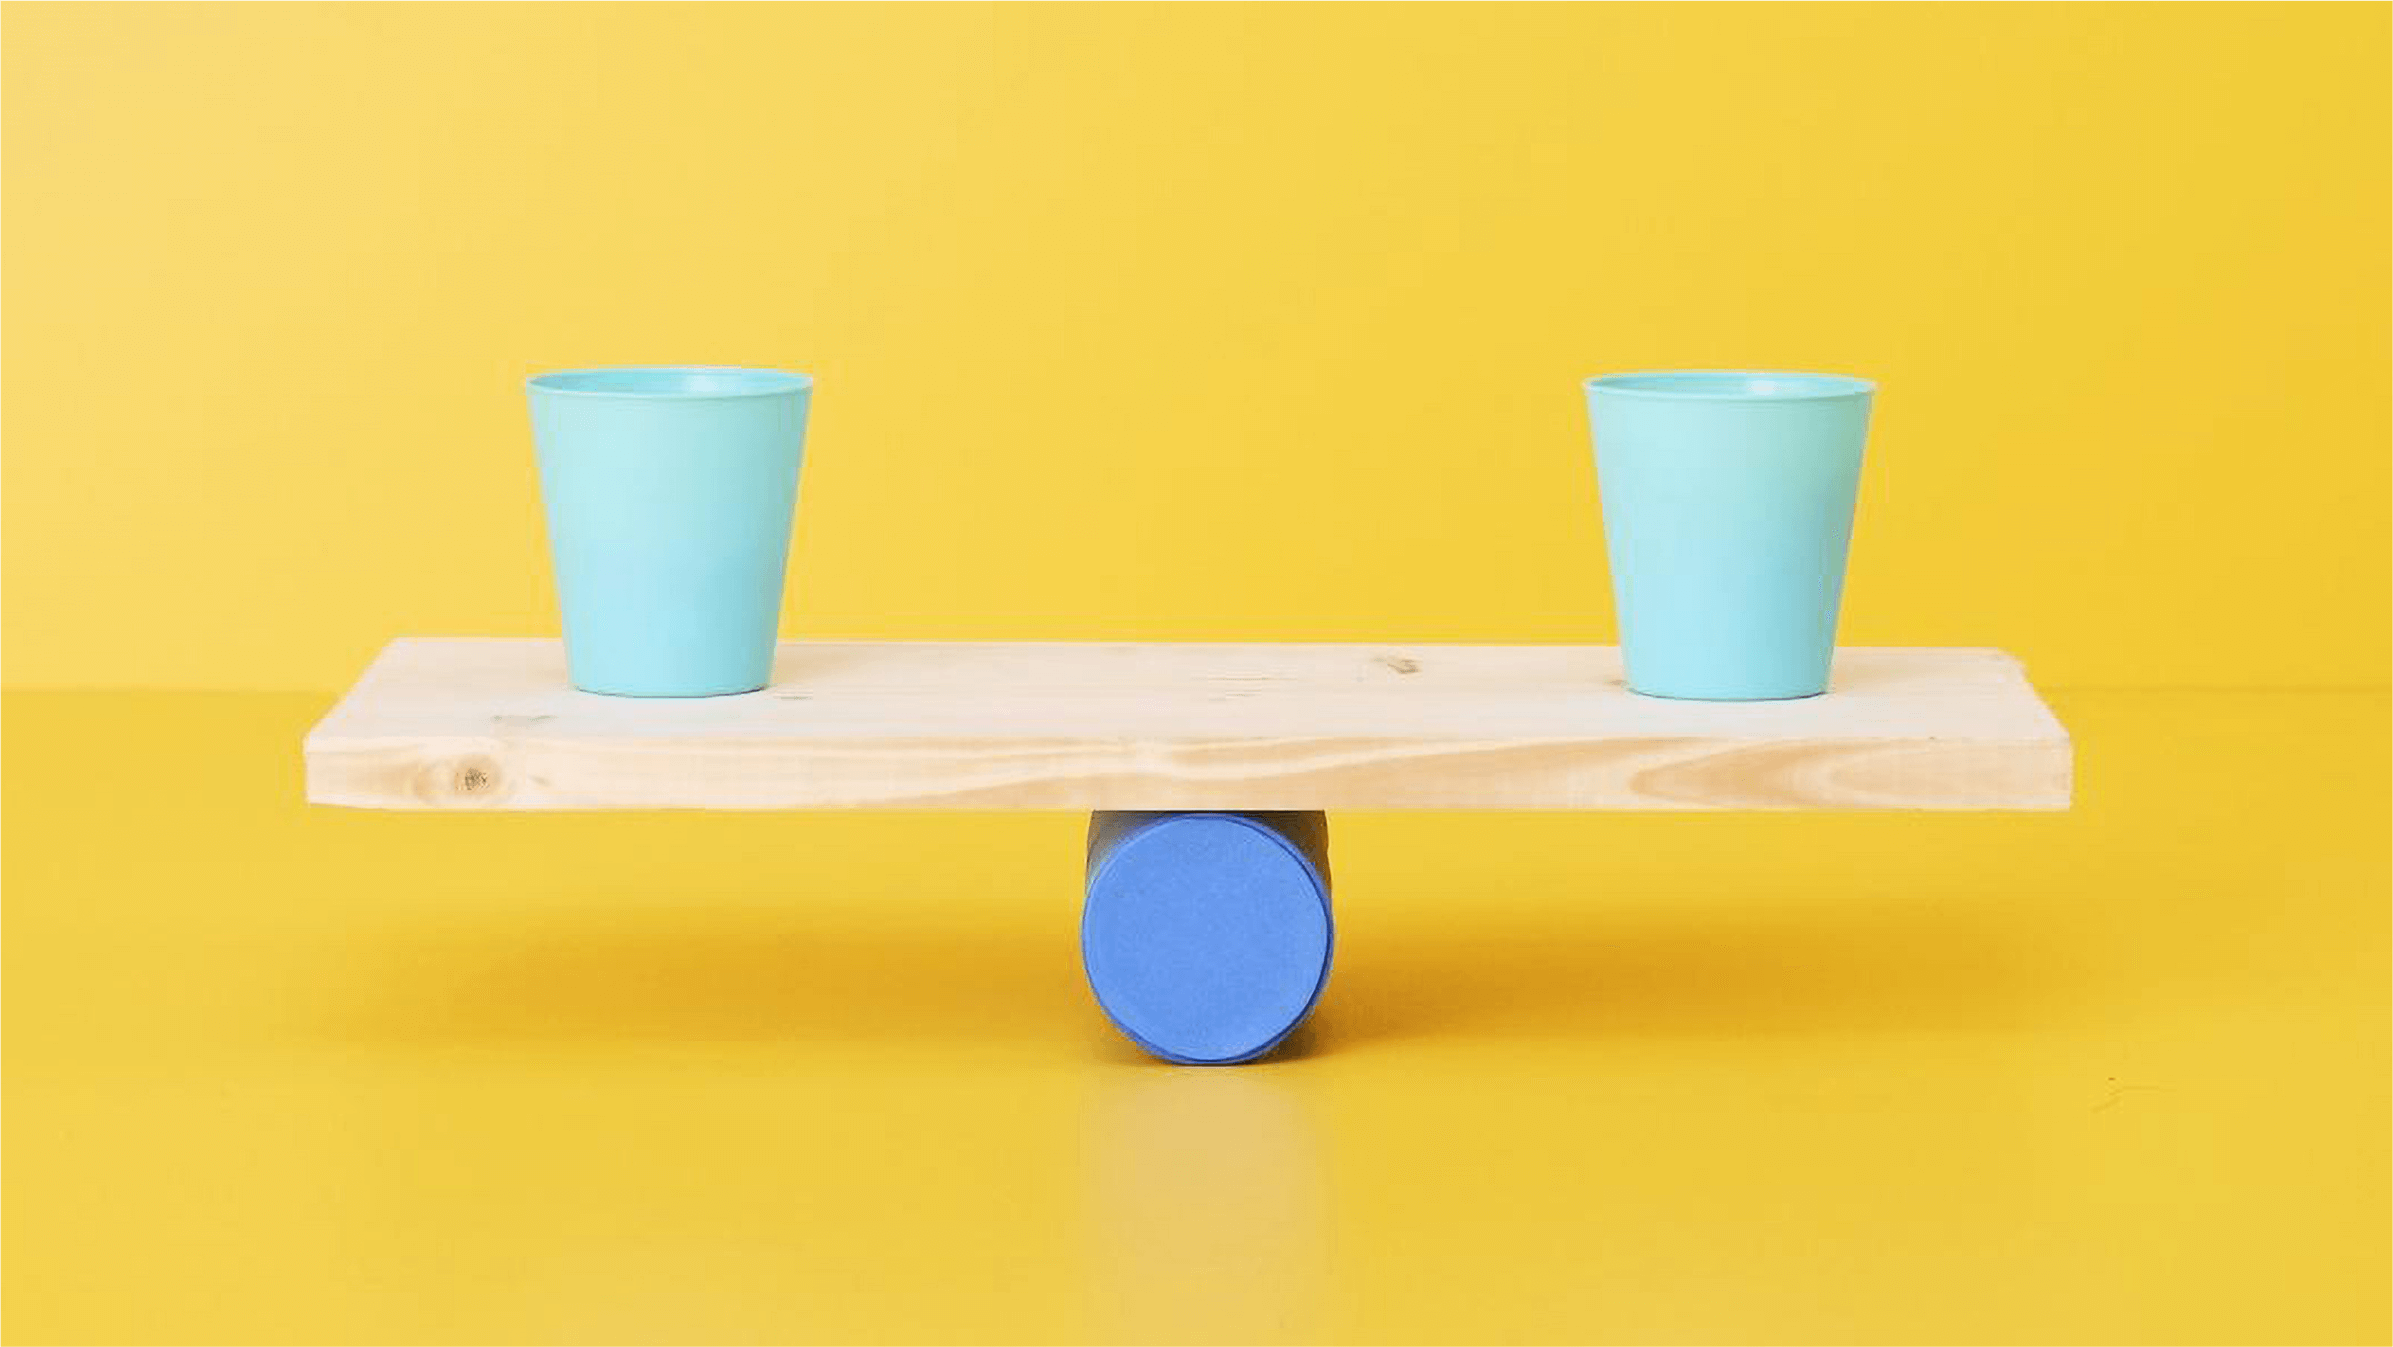 Two green cups sit on either side of a wooden plank balanced on top of a cylindrical roller.